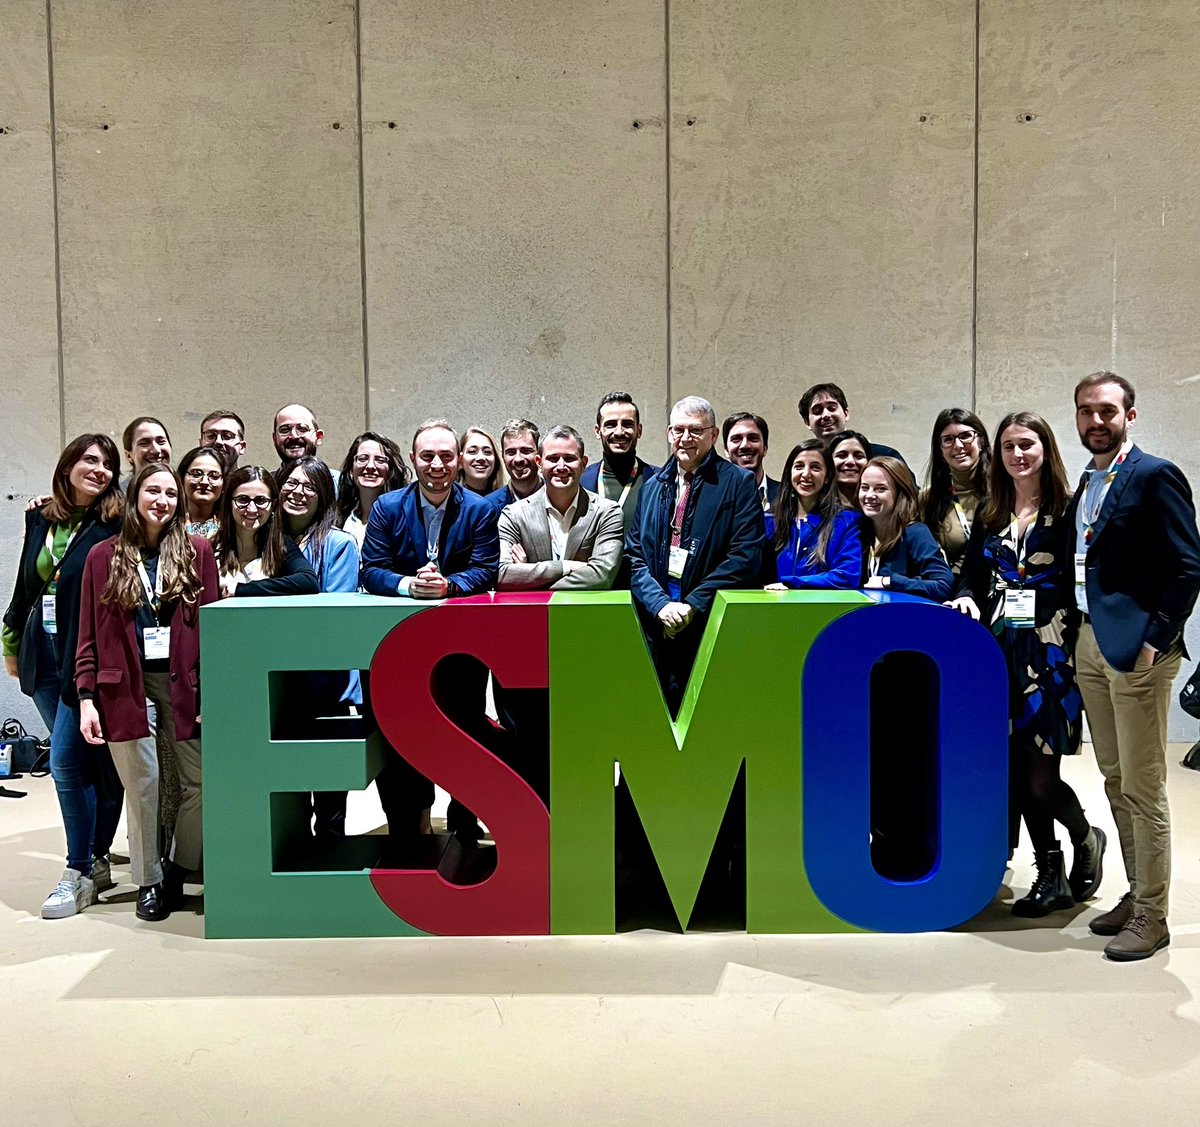 I’m excited to support @curijoey for the ESMO Presidential Elections! A compassionate clinician and true leader in drug development, Giuseppe has trained an entire generation of young physicians, with a transformative impact in oncology. Make sure to vote for him from May 28!